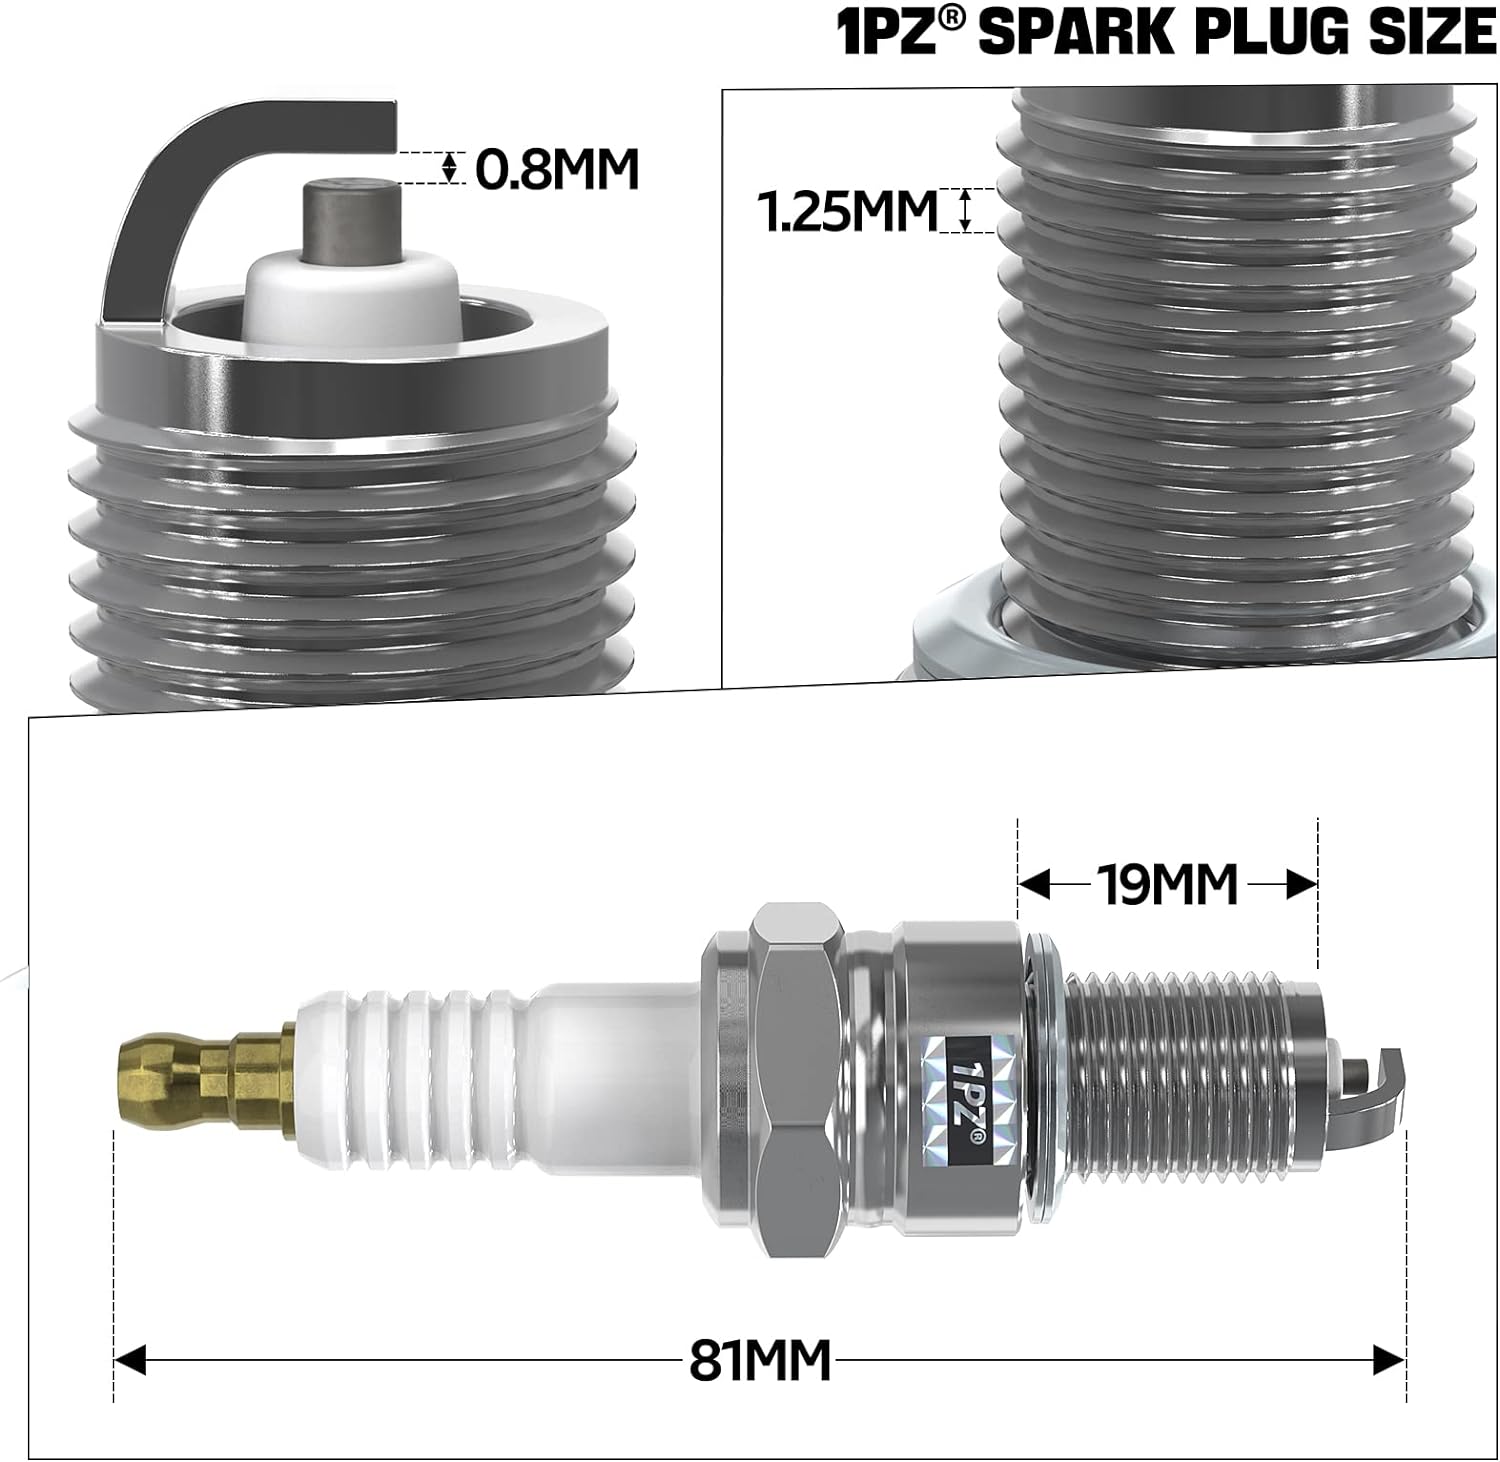 1PZ Torch F6RTC Spark Plug Compatible with BPR6ES, Bosch WR6DC WR7DC, Champion RN9YC RN10YC, OCC-751-10292, MTD 751-10292, 951-10292, Replace for Mowers Snow Blowers Splitters Tillers(5 Pack)